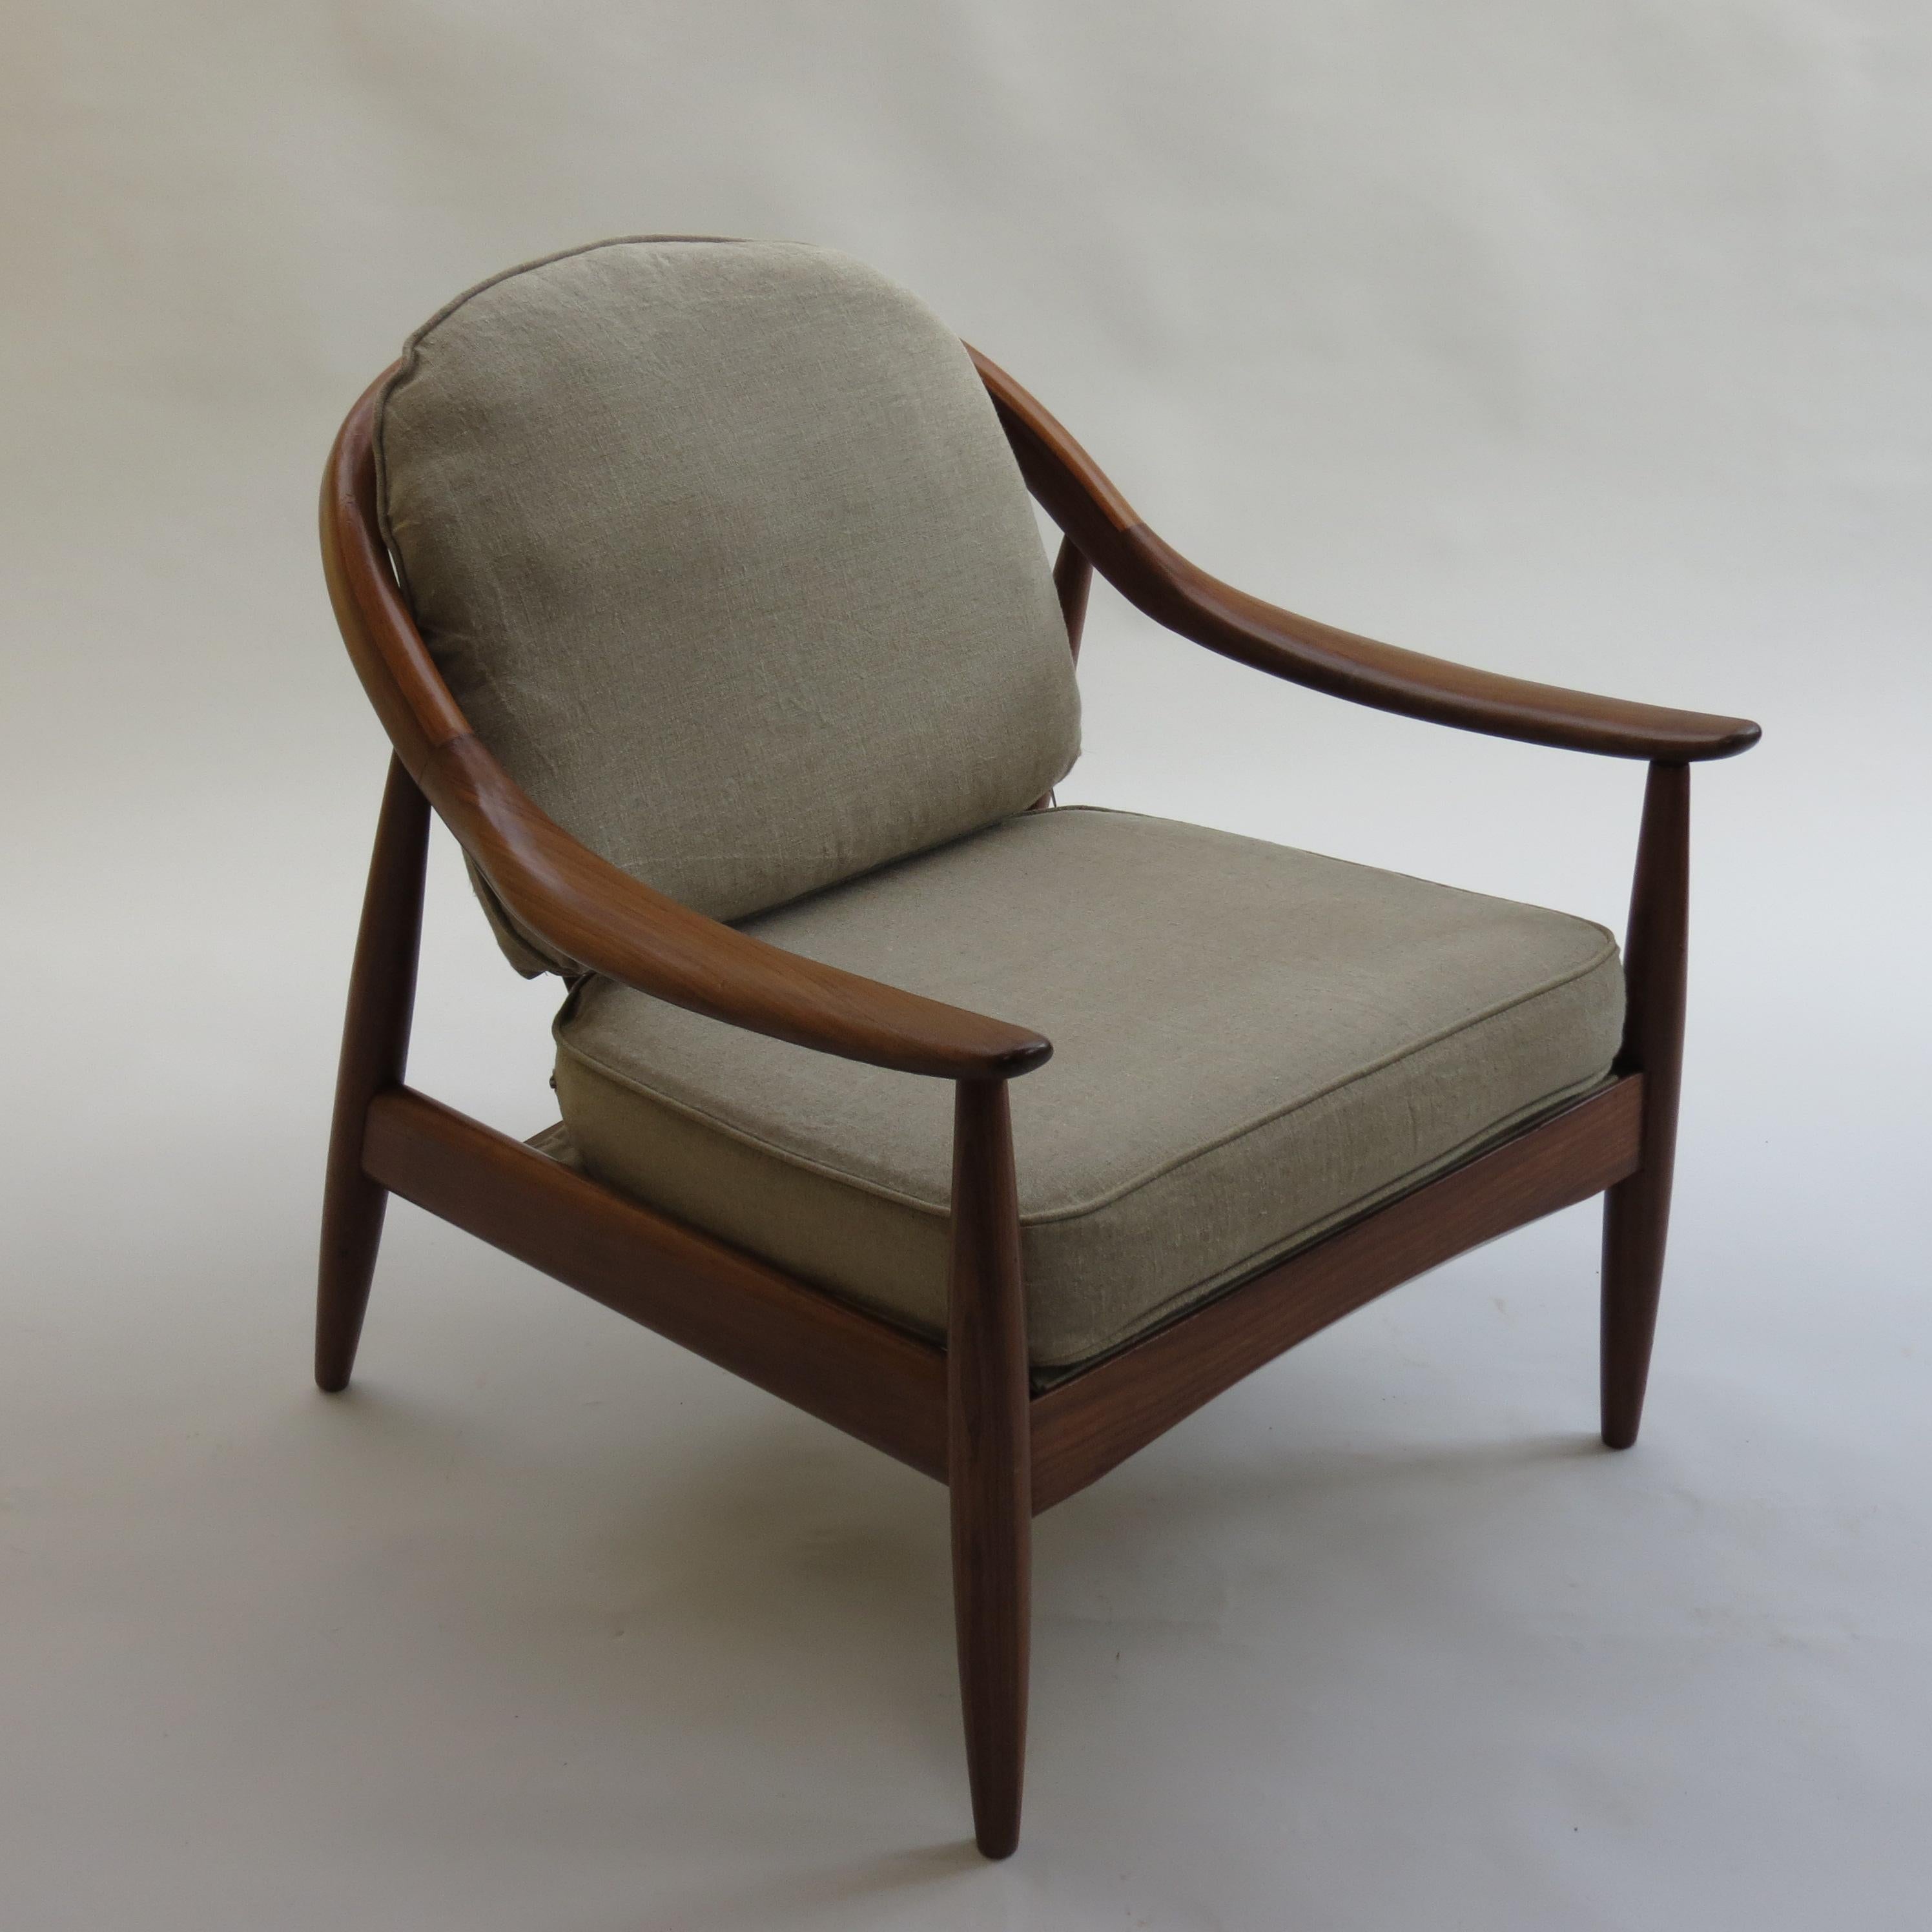 Afrormosia Midcentury Armchair by Greaves and Thomas 1960s B 8